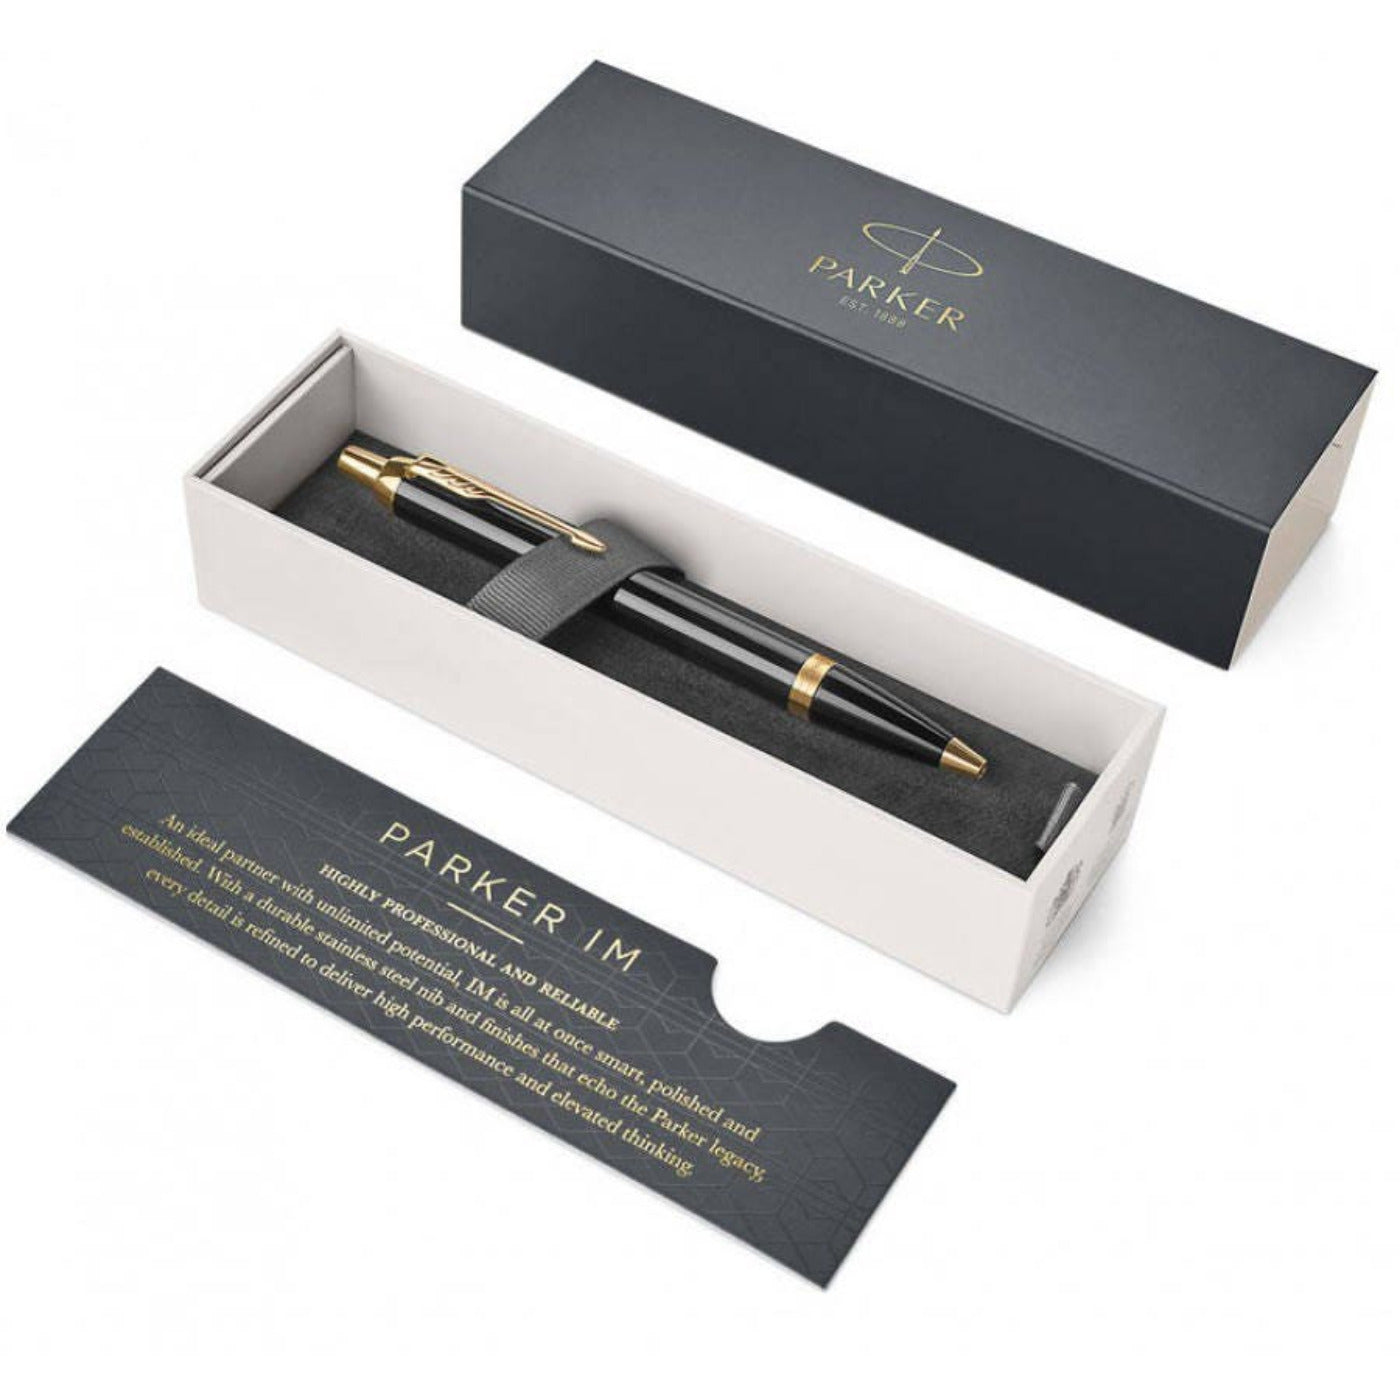 Personalised Parker IM Black With Gold Trim Ballpoint Pen